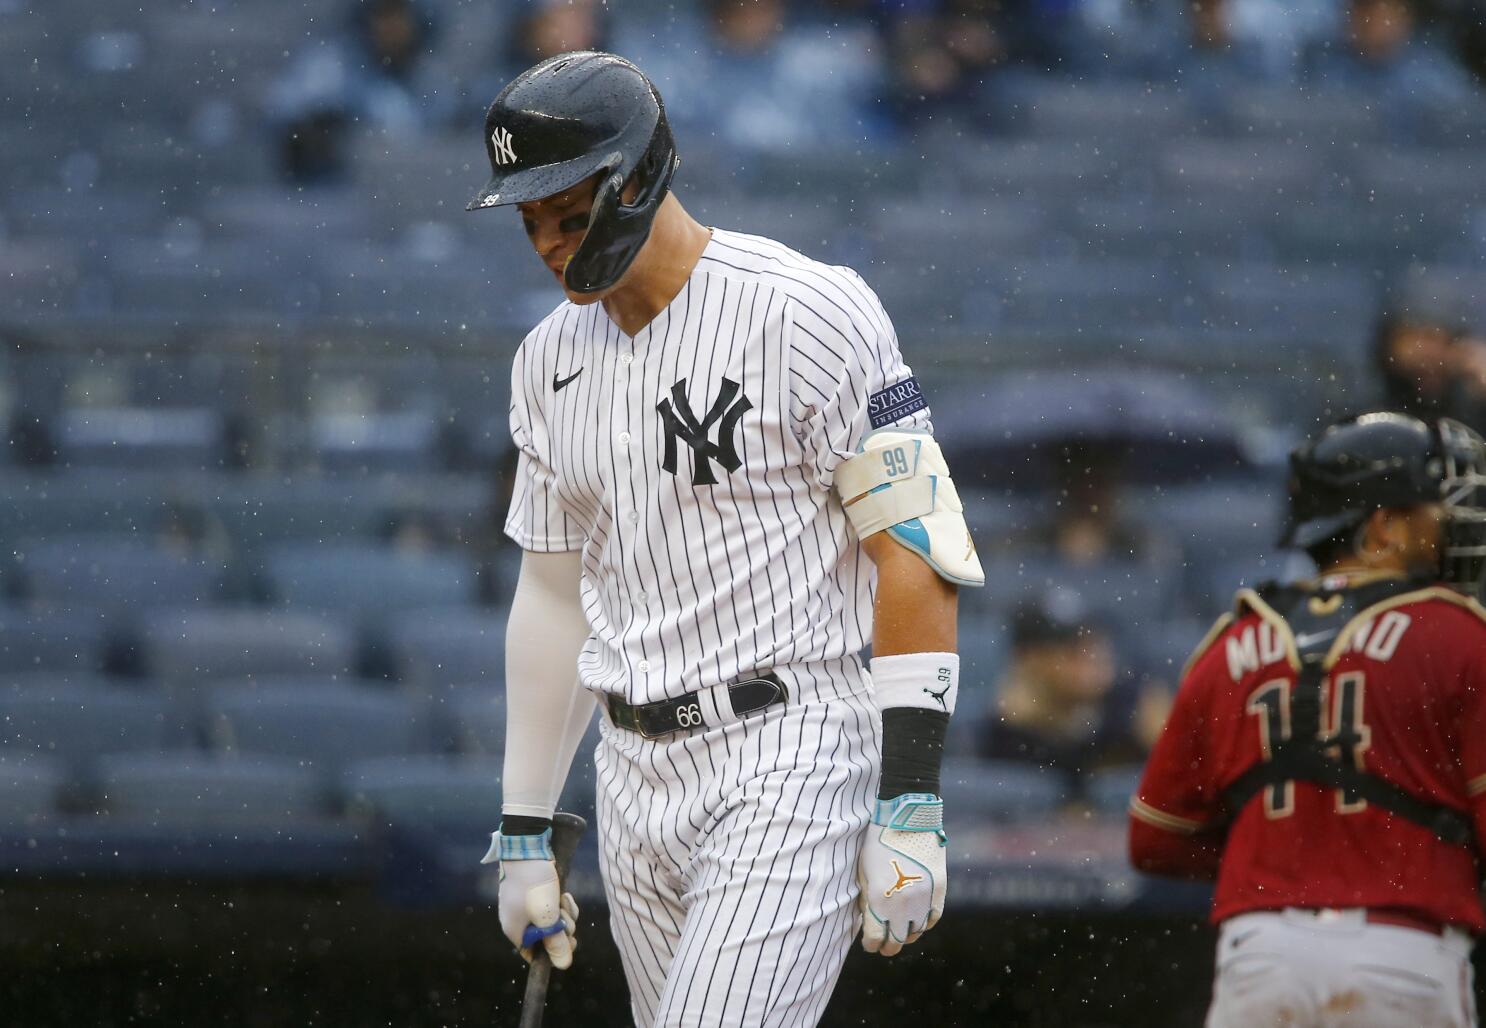 Yankees may not have room for OF Williams